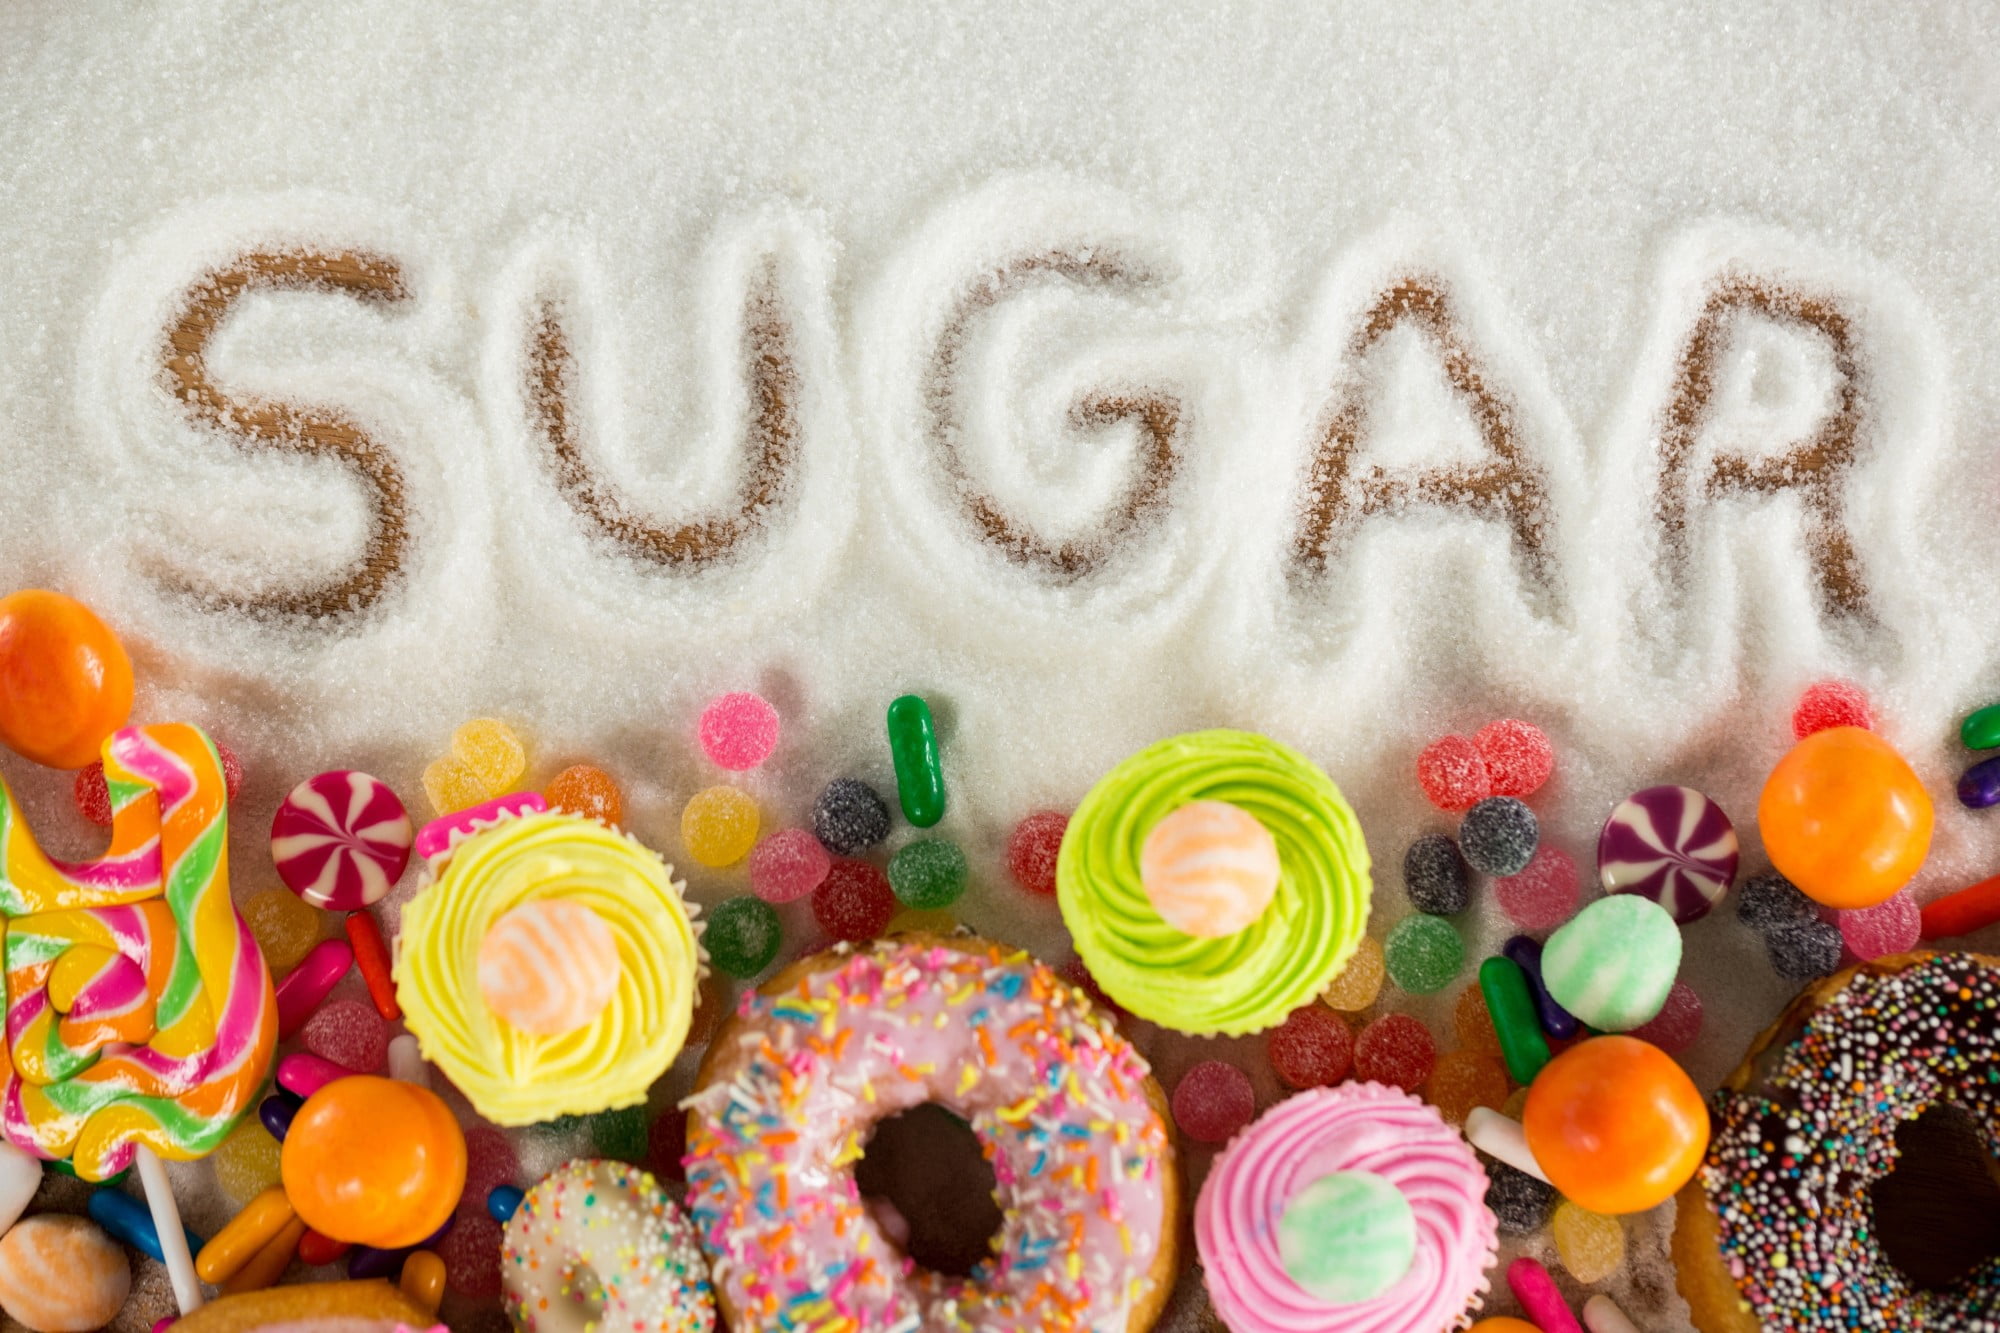 We've been told that processed sugar is harmful for our health - but what about natural sugar from fruit? Click here to learn the facts.